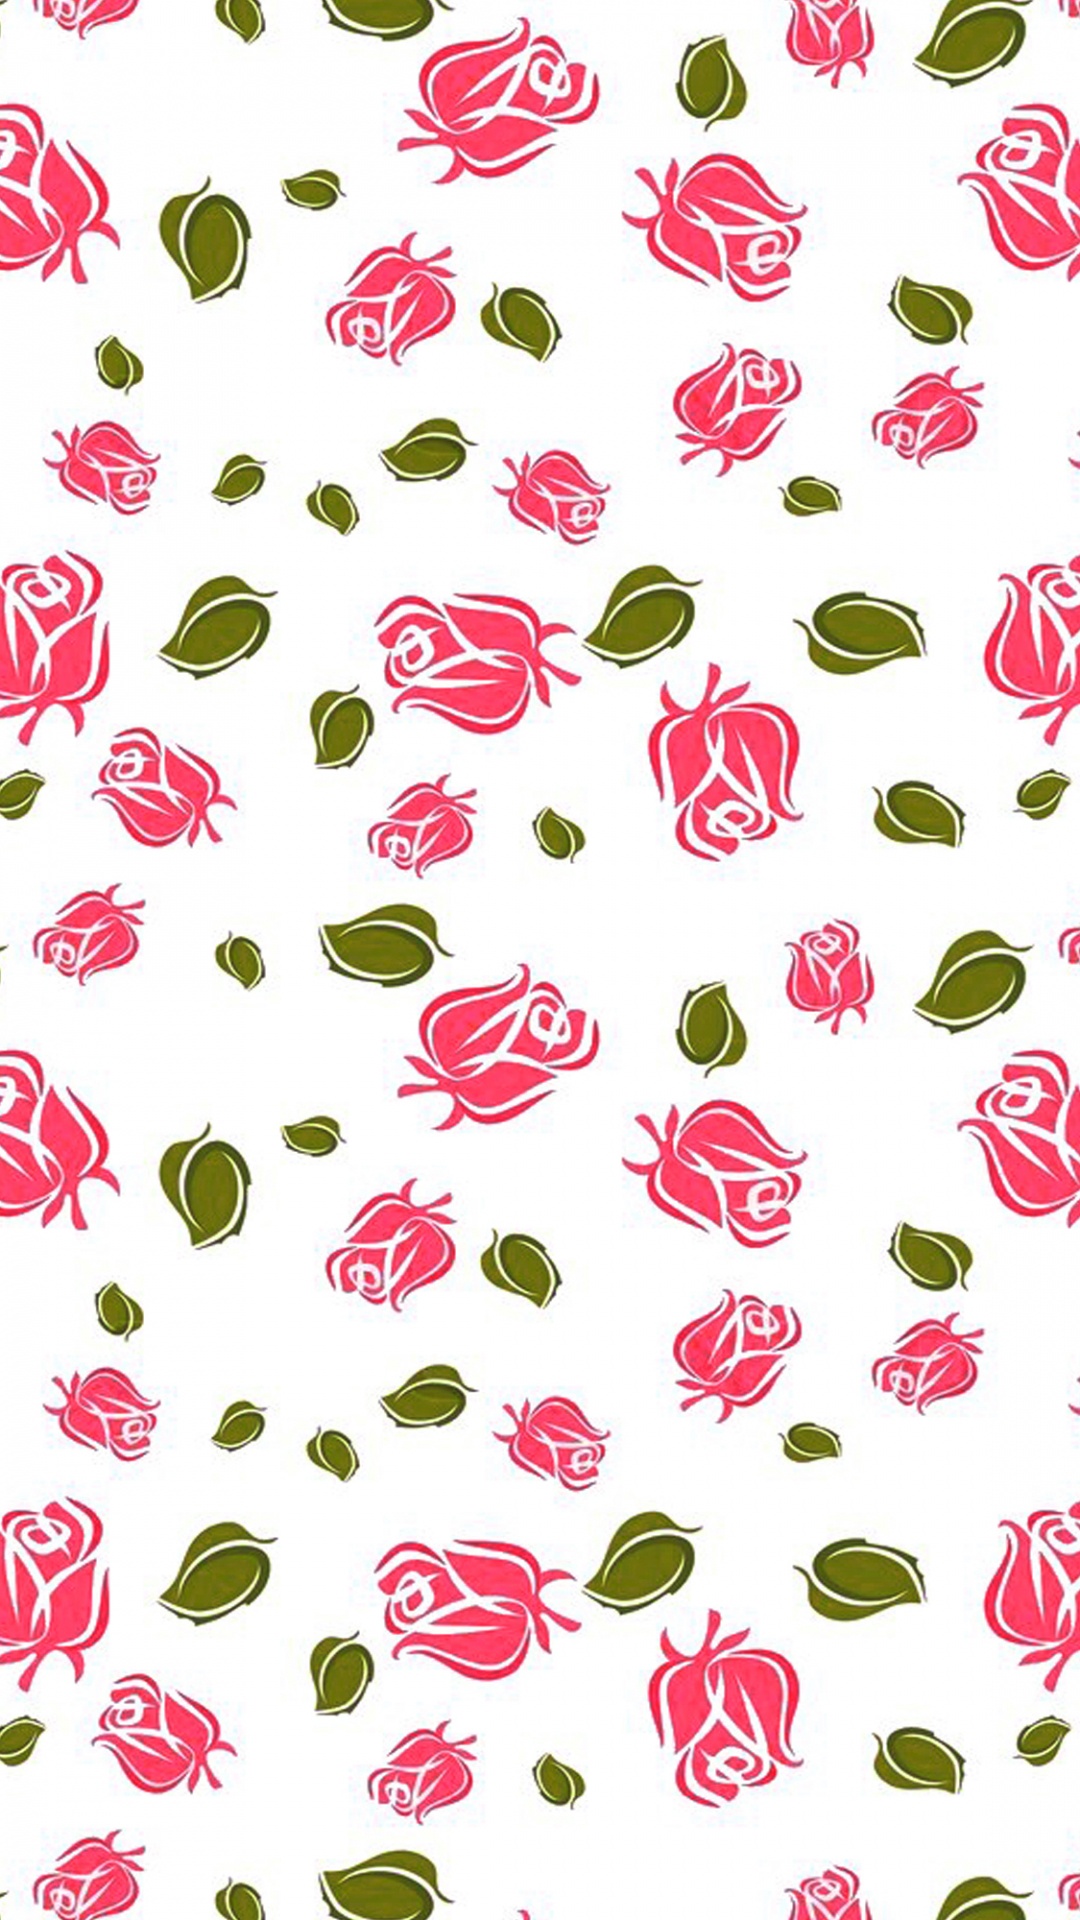 White Pink and Green Hearts and Hearts Illustration. Wallpaper in 1080x1920 Resolution